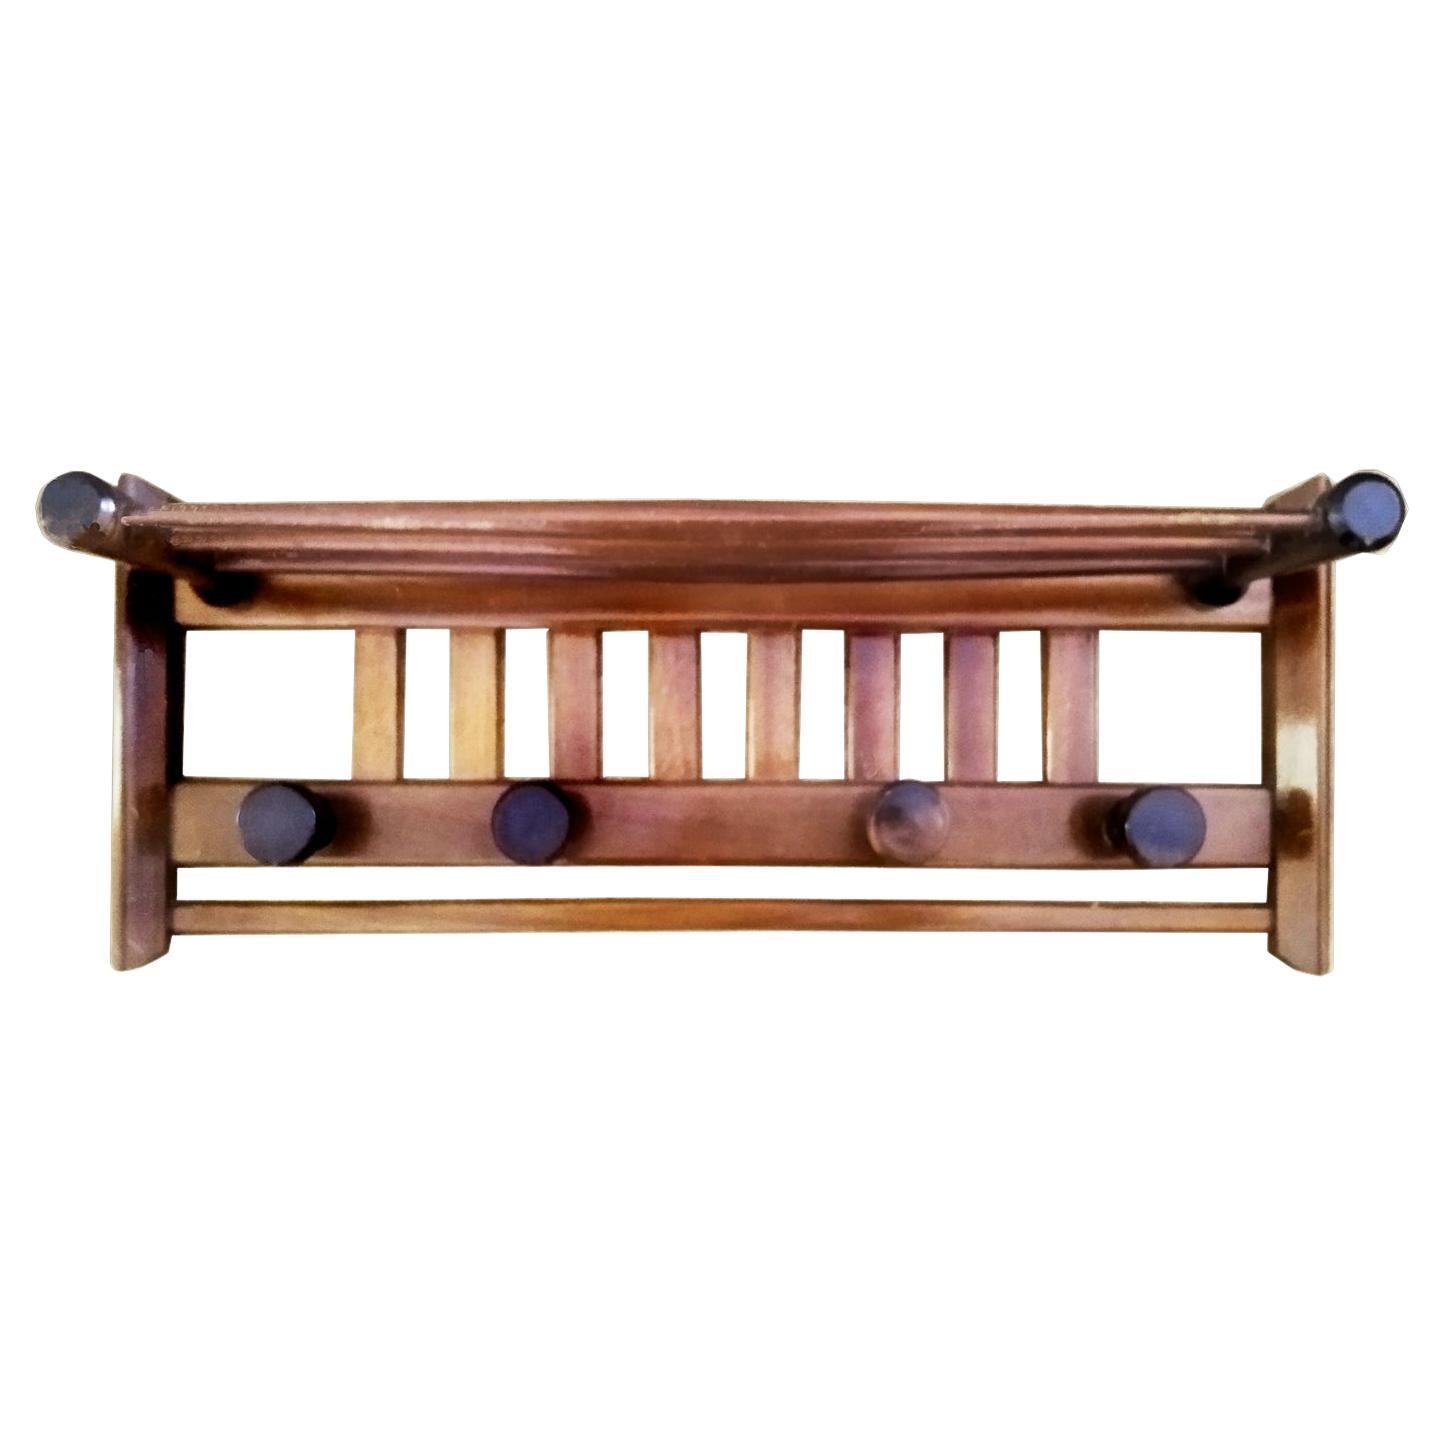 Coat Rack From the Mid 20th Century